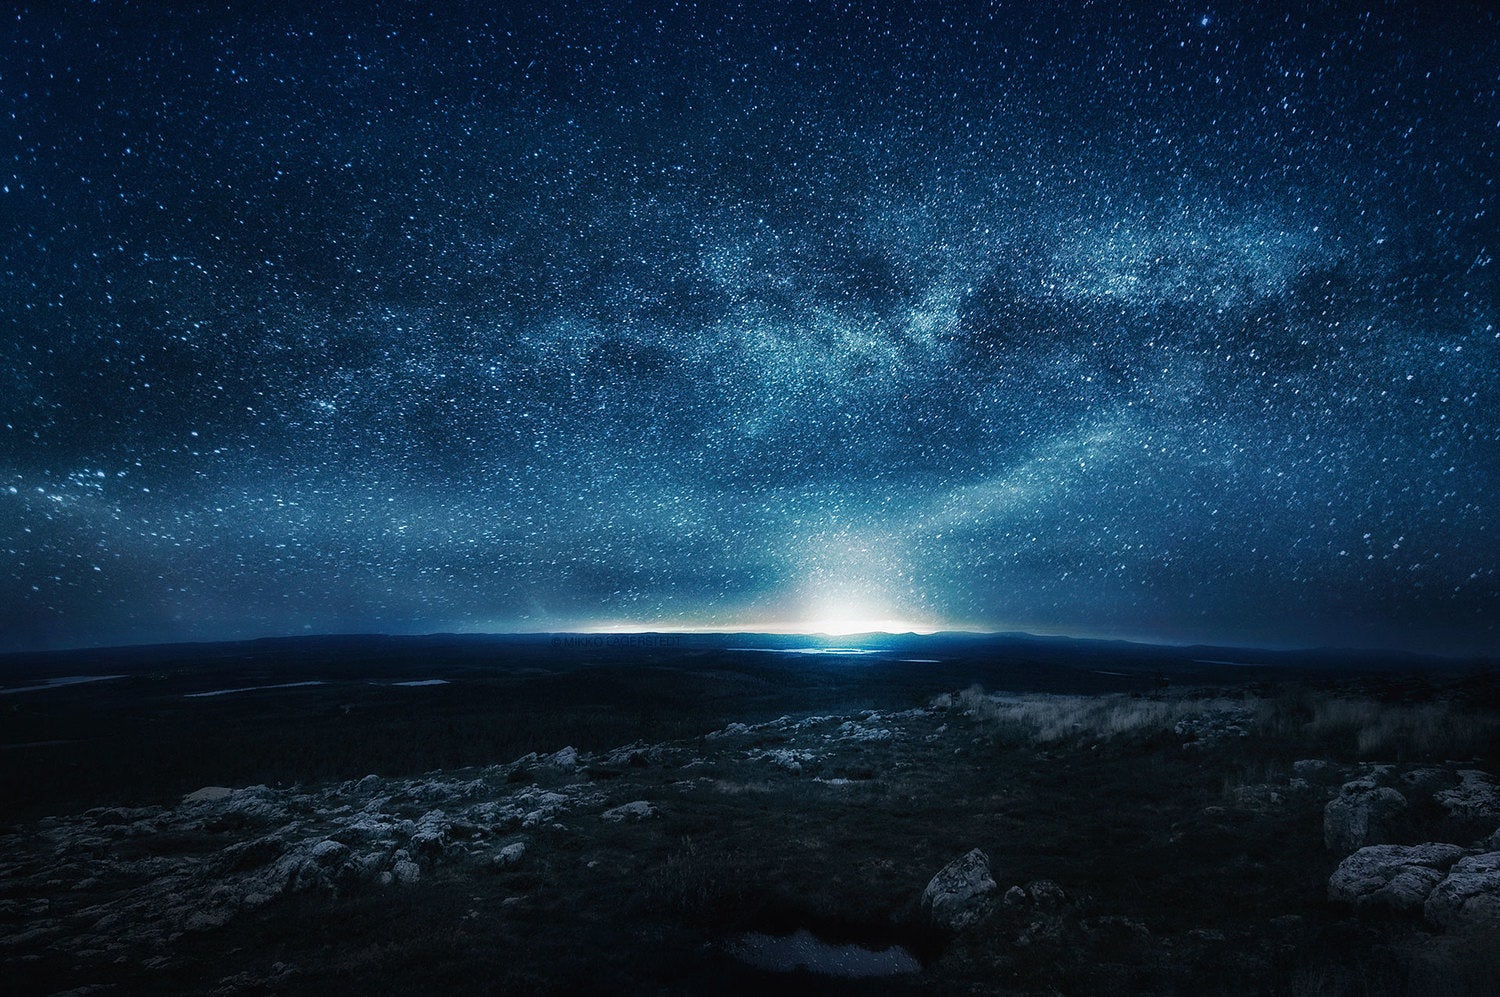 Mikko Lagerstedt – Atmospheric Photography